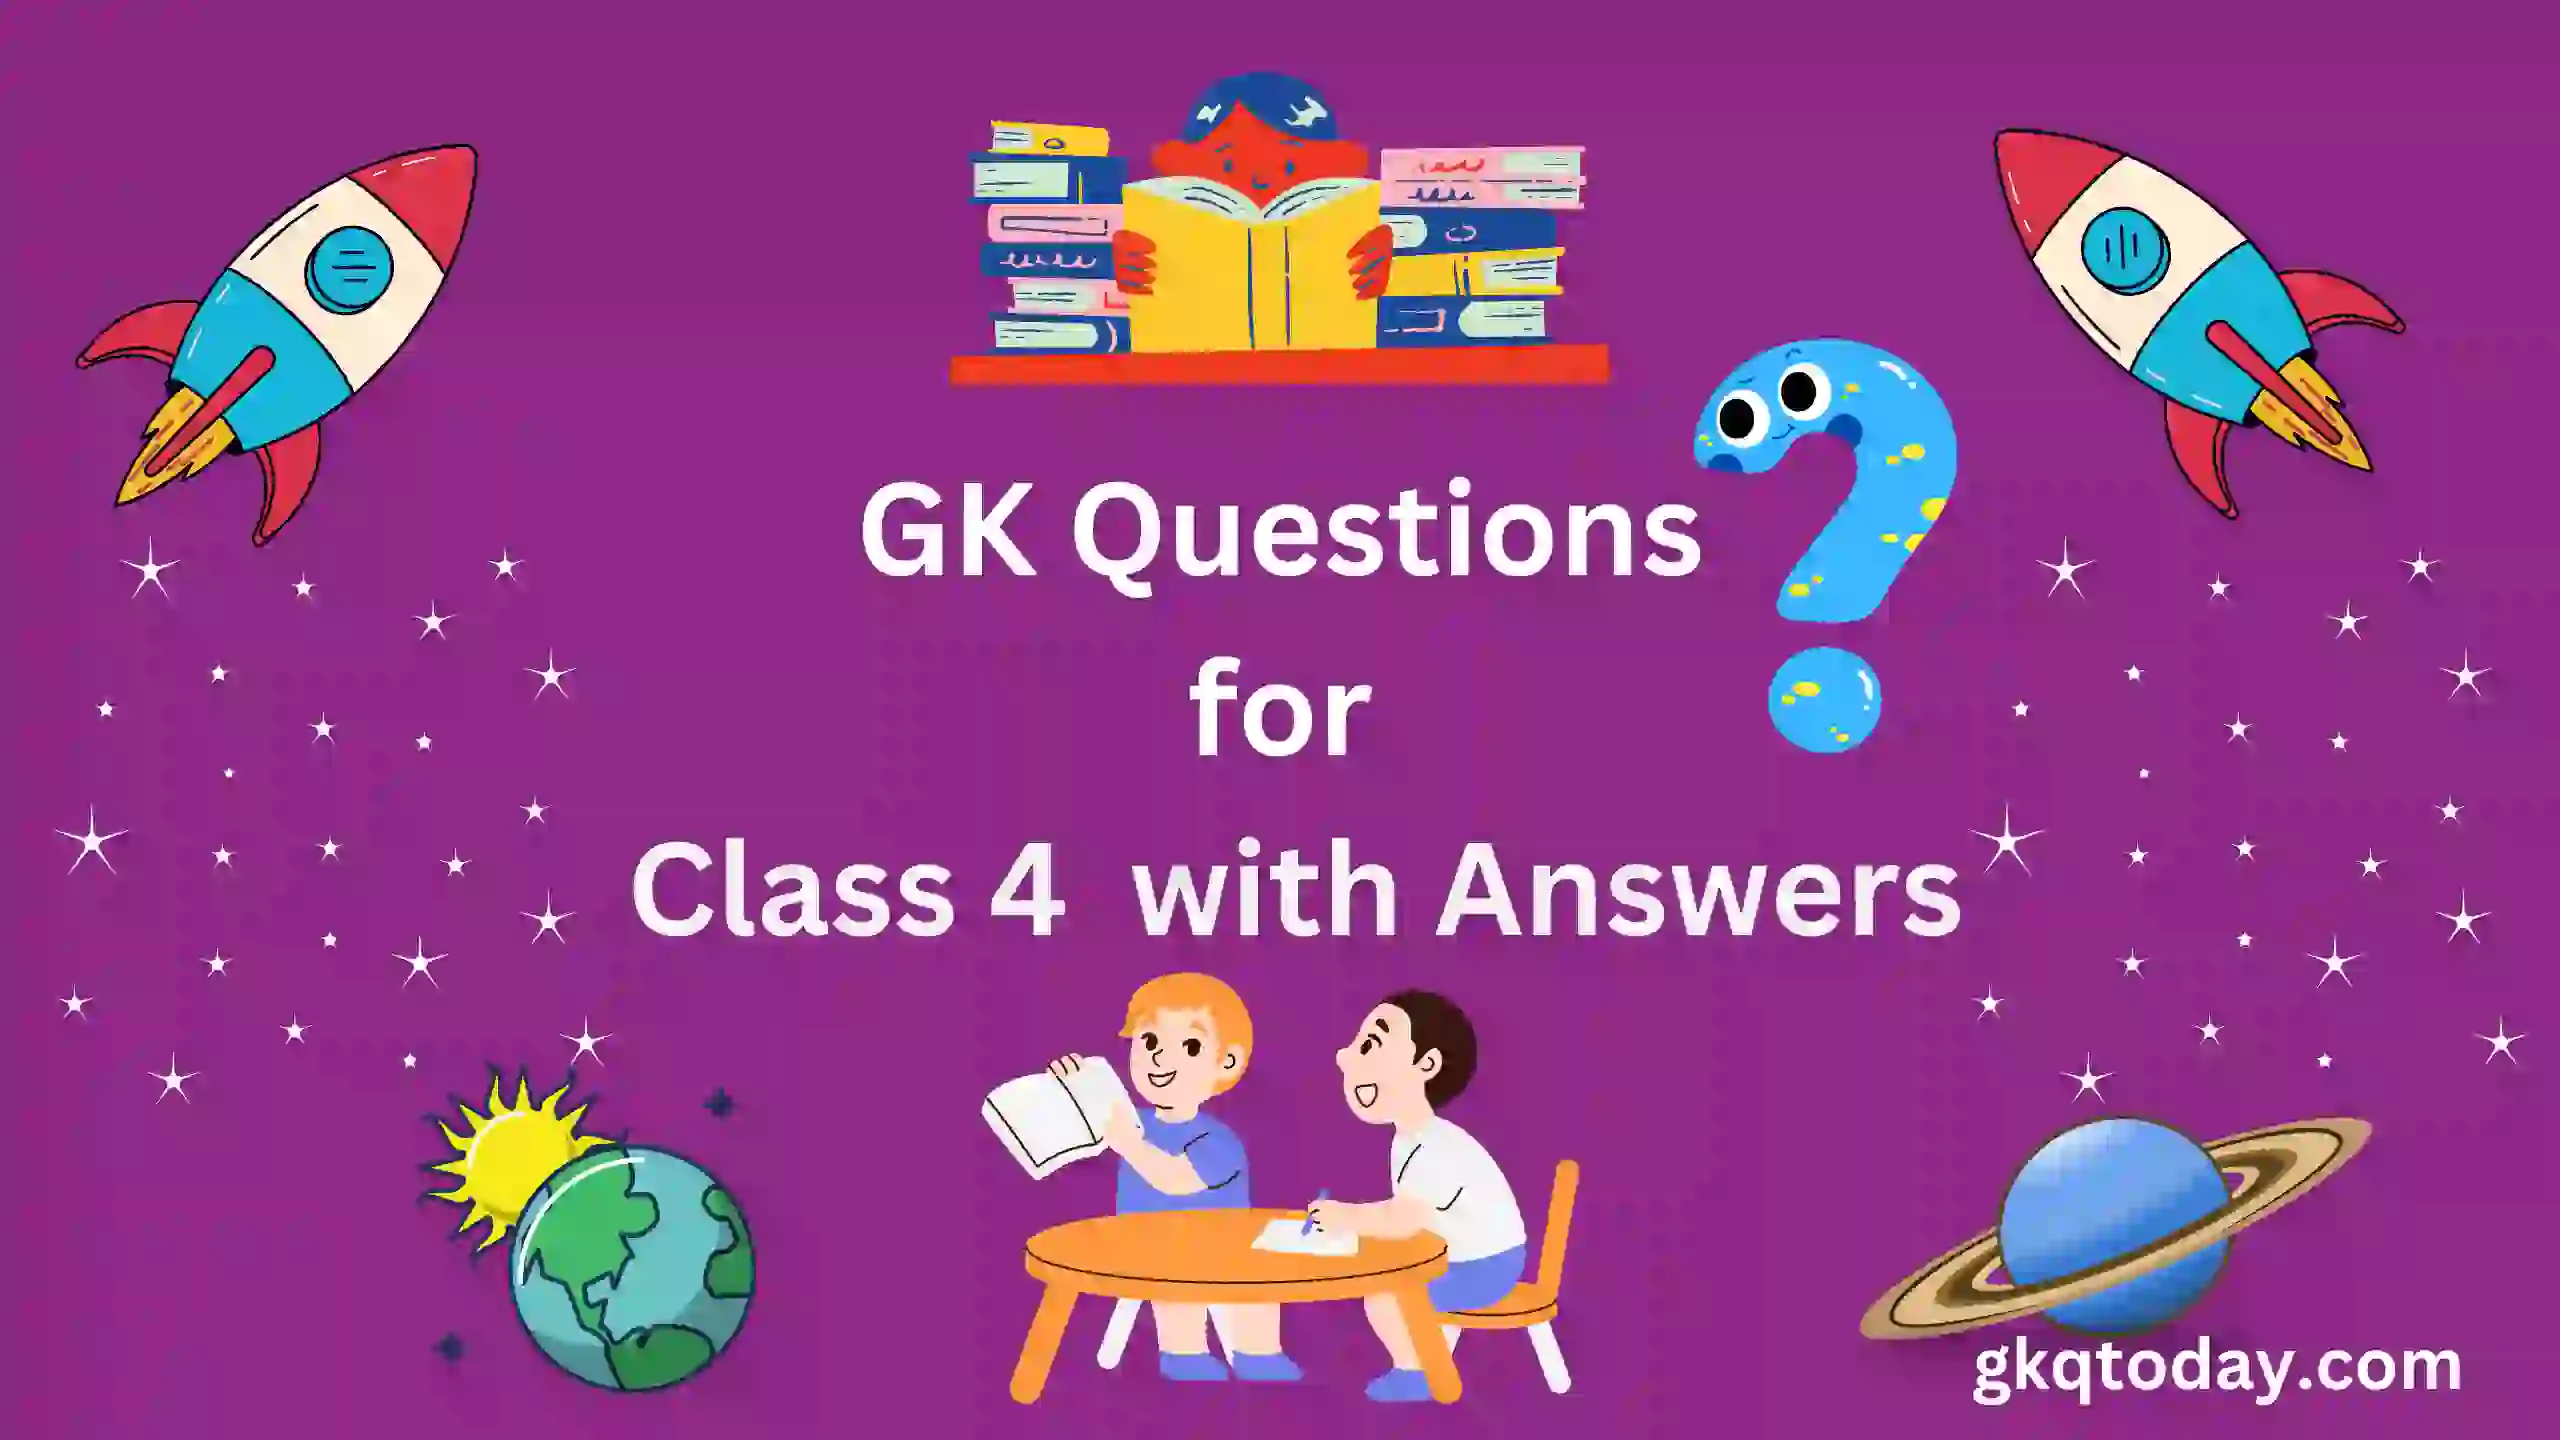 GK Questions for Class 4 with Answers